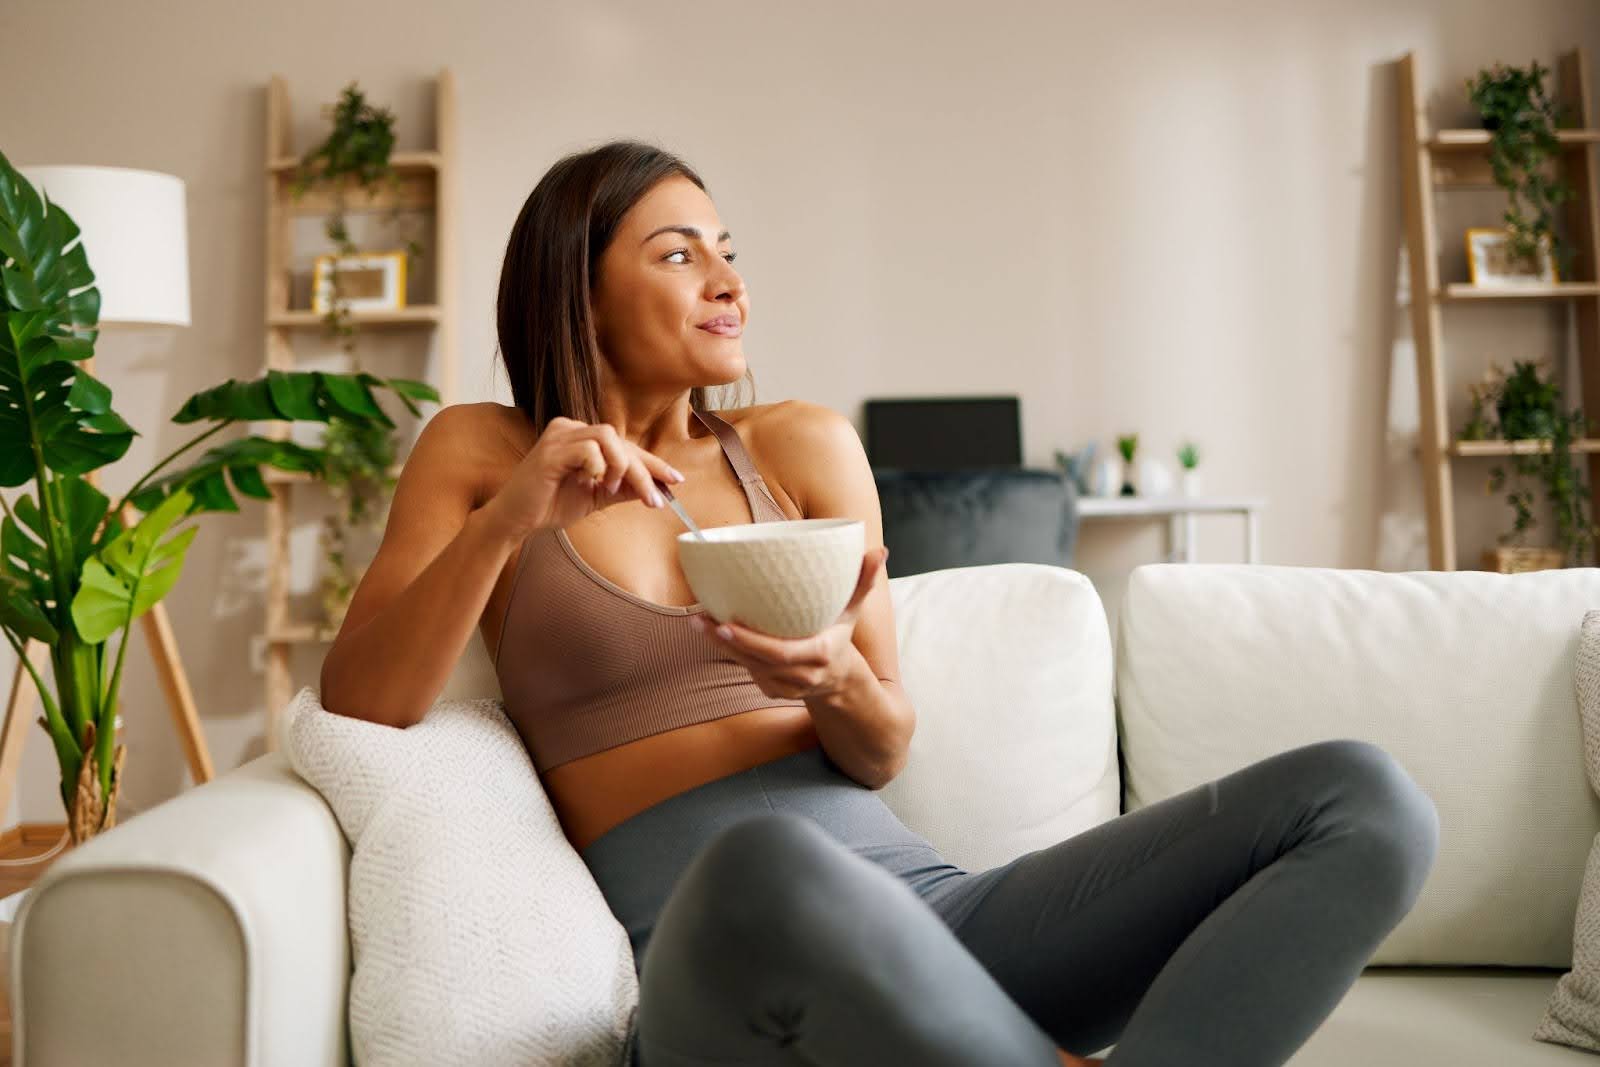 Fit, beautiful woman sitting on a couch, eating a small and healthy meal